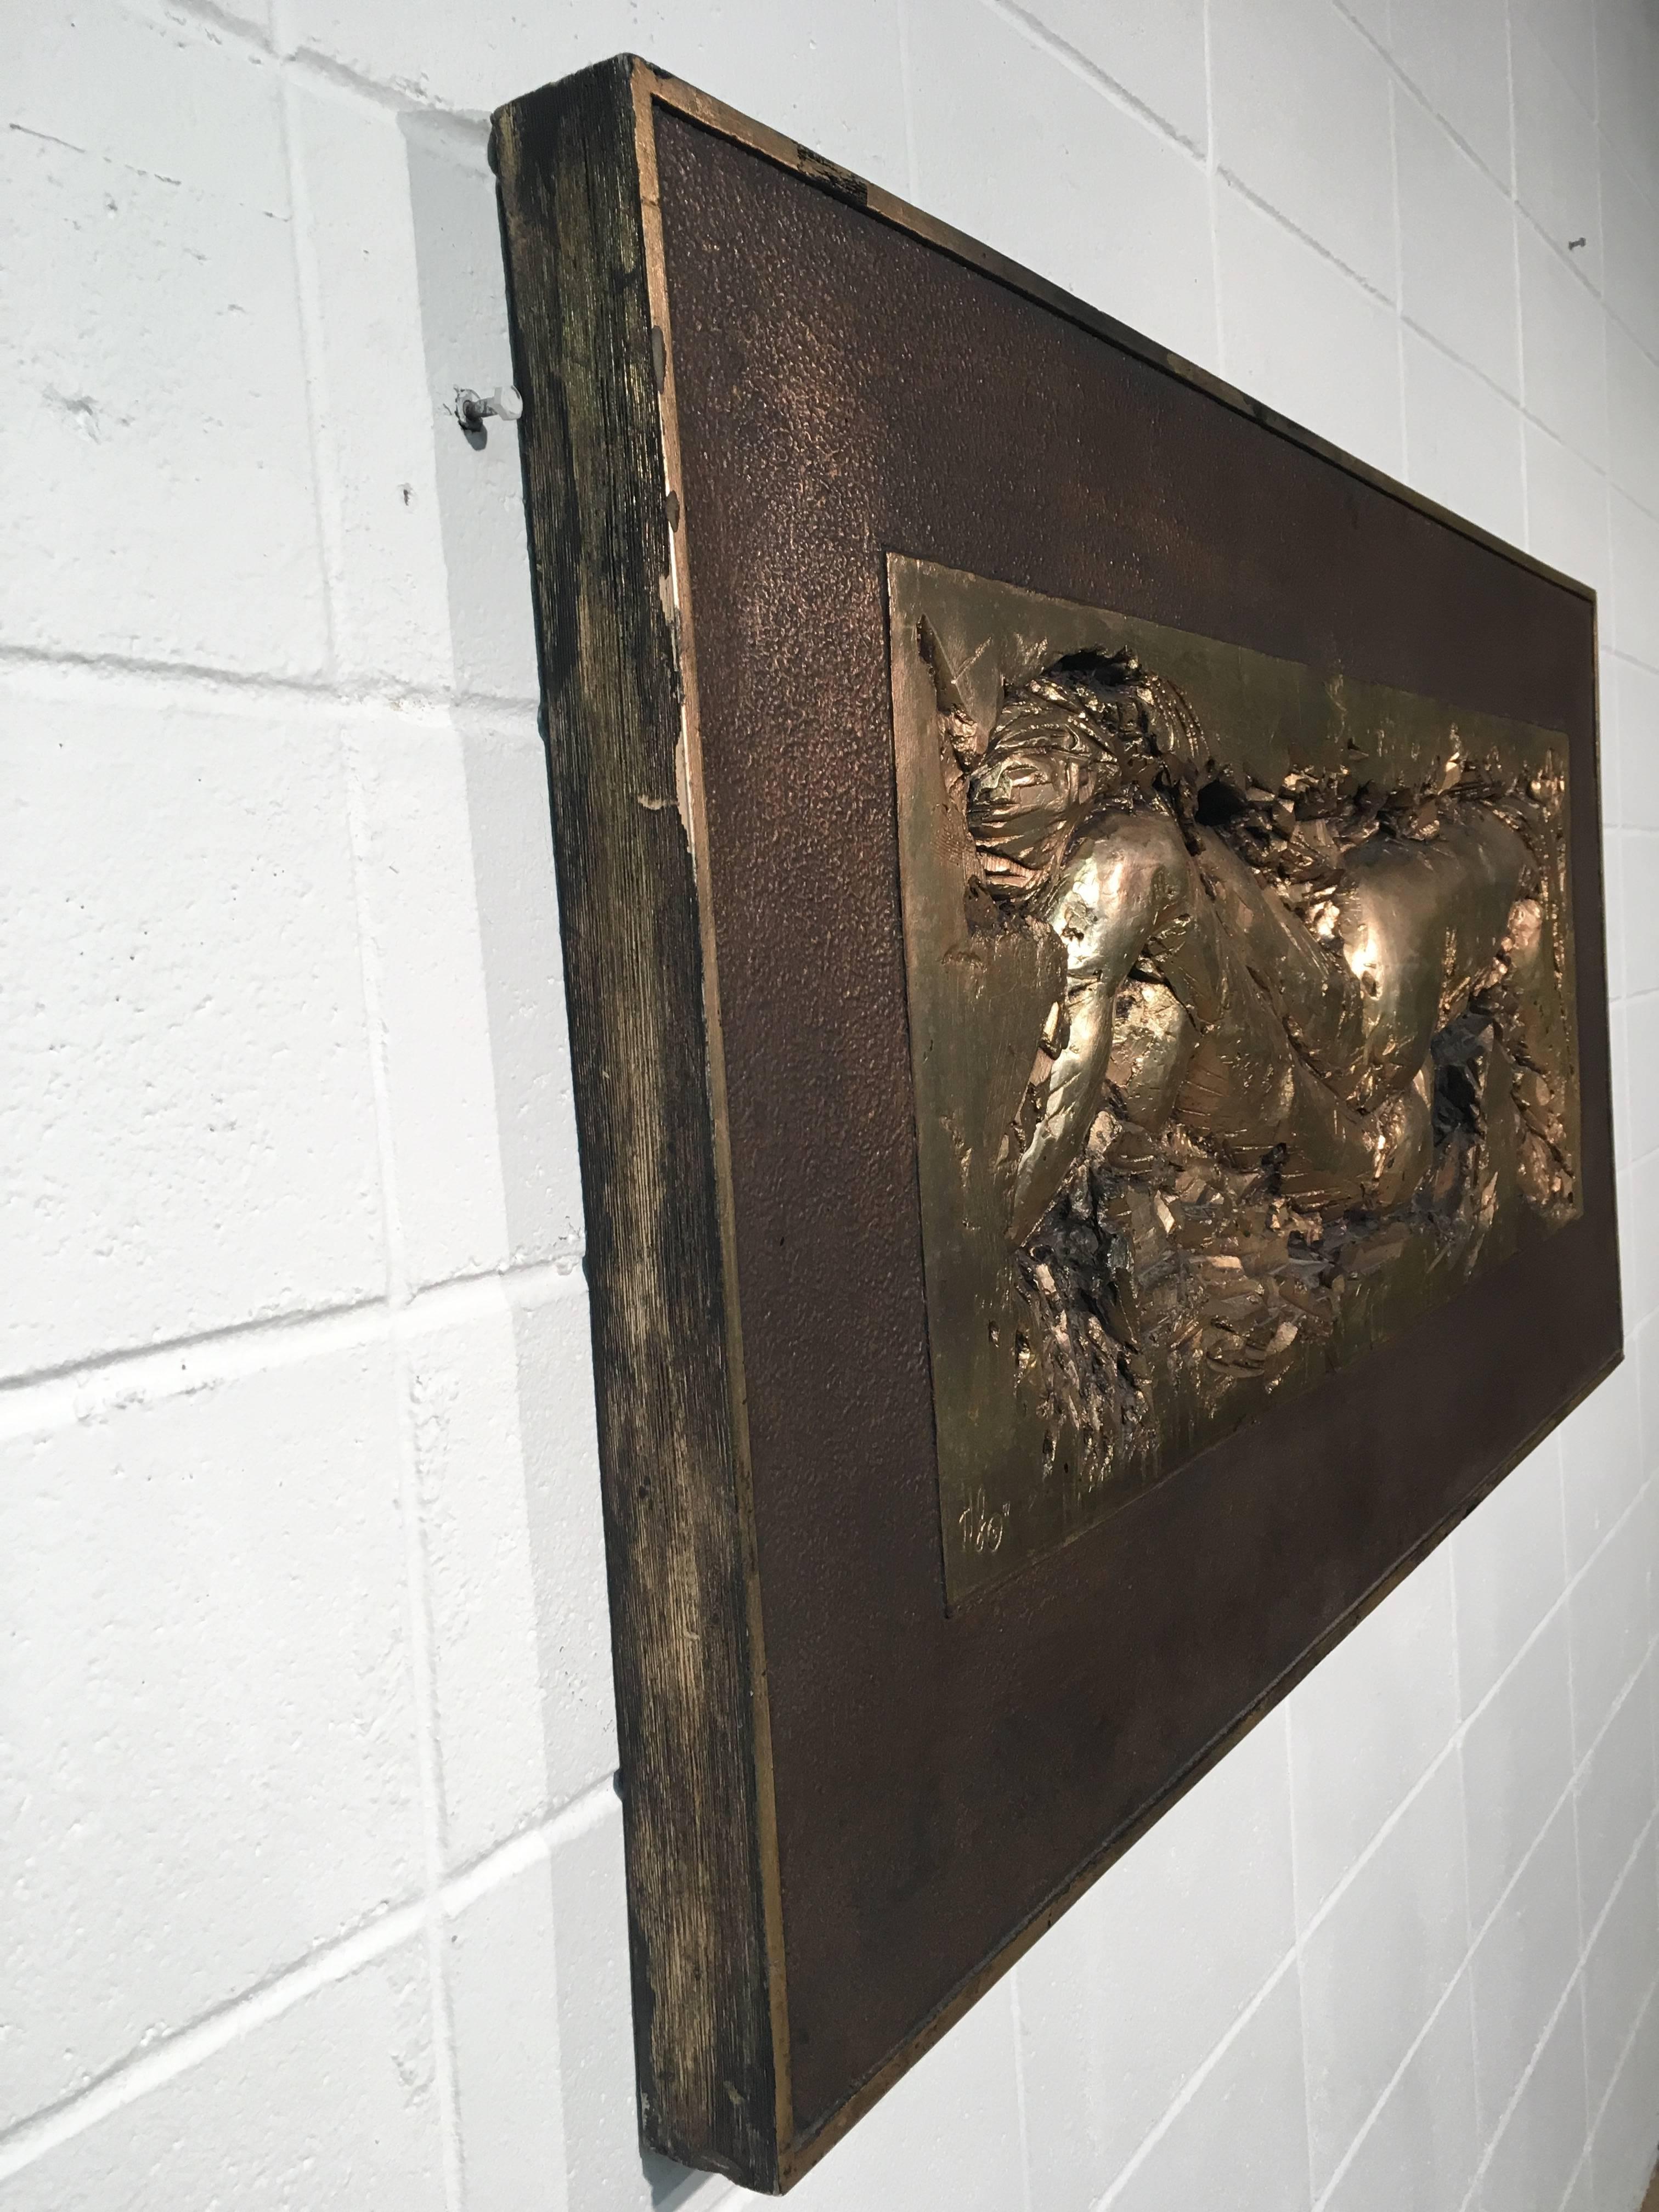 Stunning large-scale wall sculpture of a nude figure. Cast resin colored in bronze tones. Signed and dated 71'. Very interesting and unique. Great vintage condition with only minimal wear. There are no known issues that would detract from aesthetics